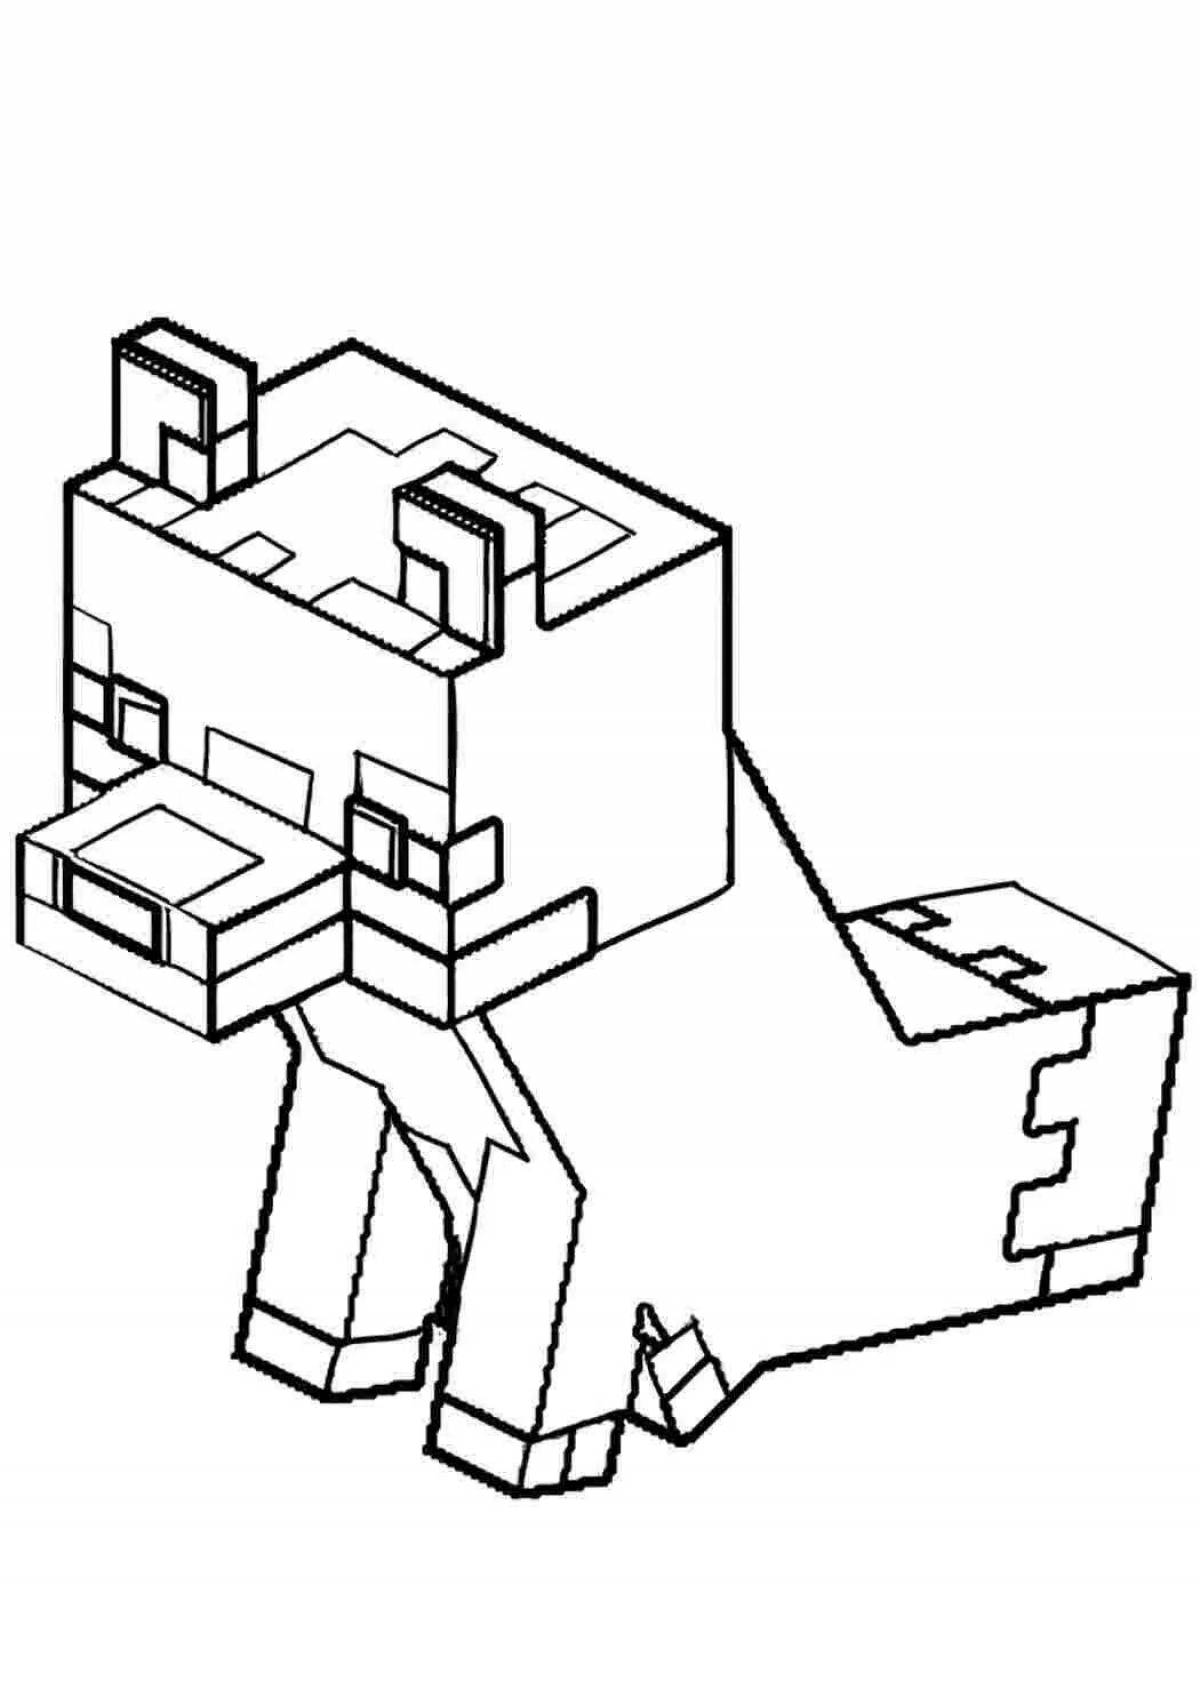 Intriguing minecraft panda coloring page